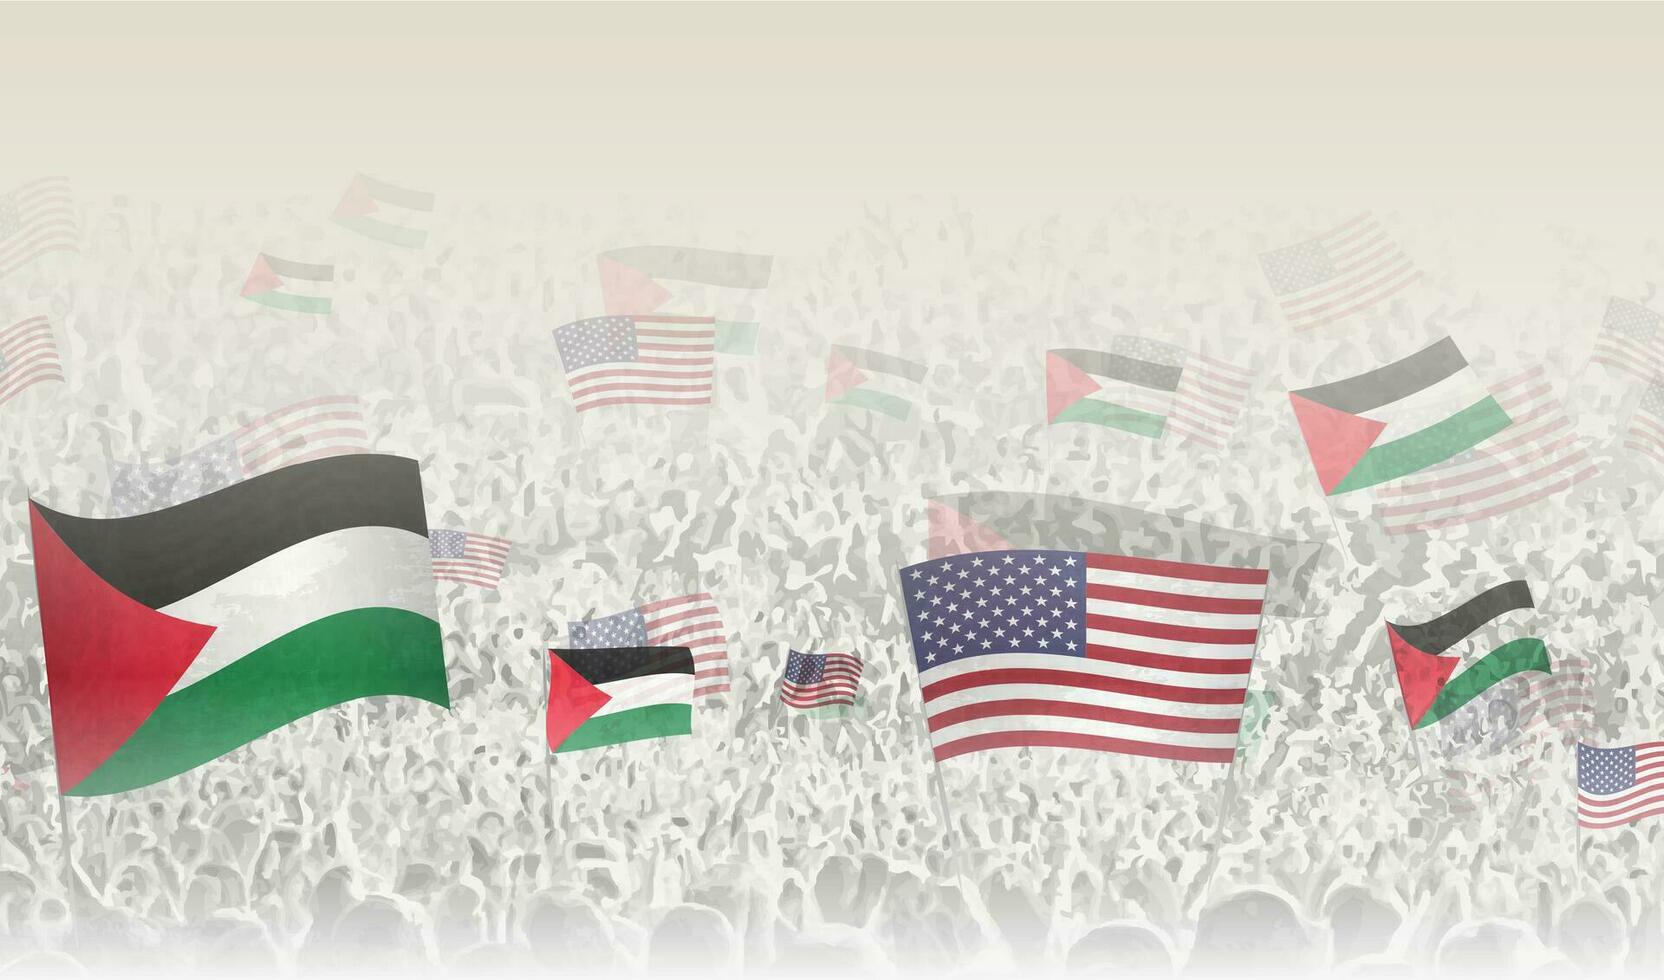 Palestine and USA flags in a crowd of cheering people. vector